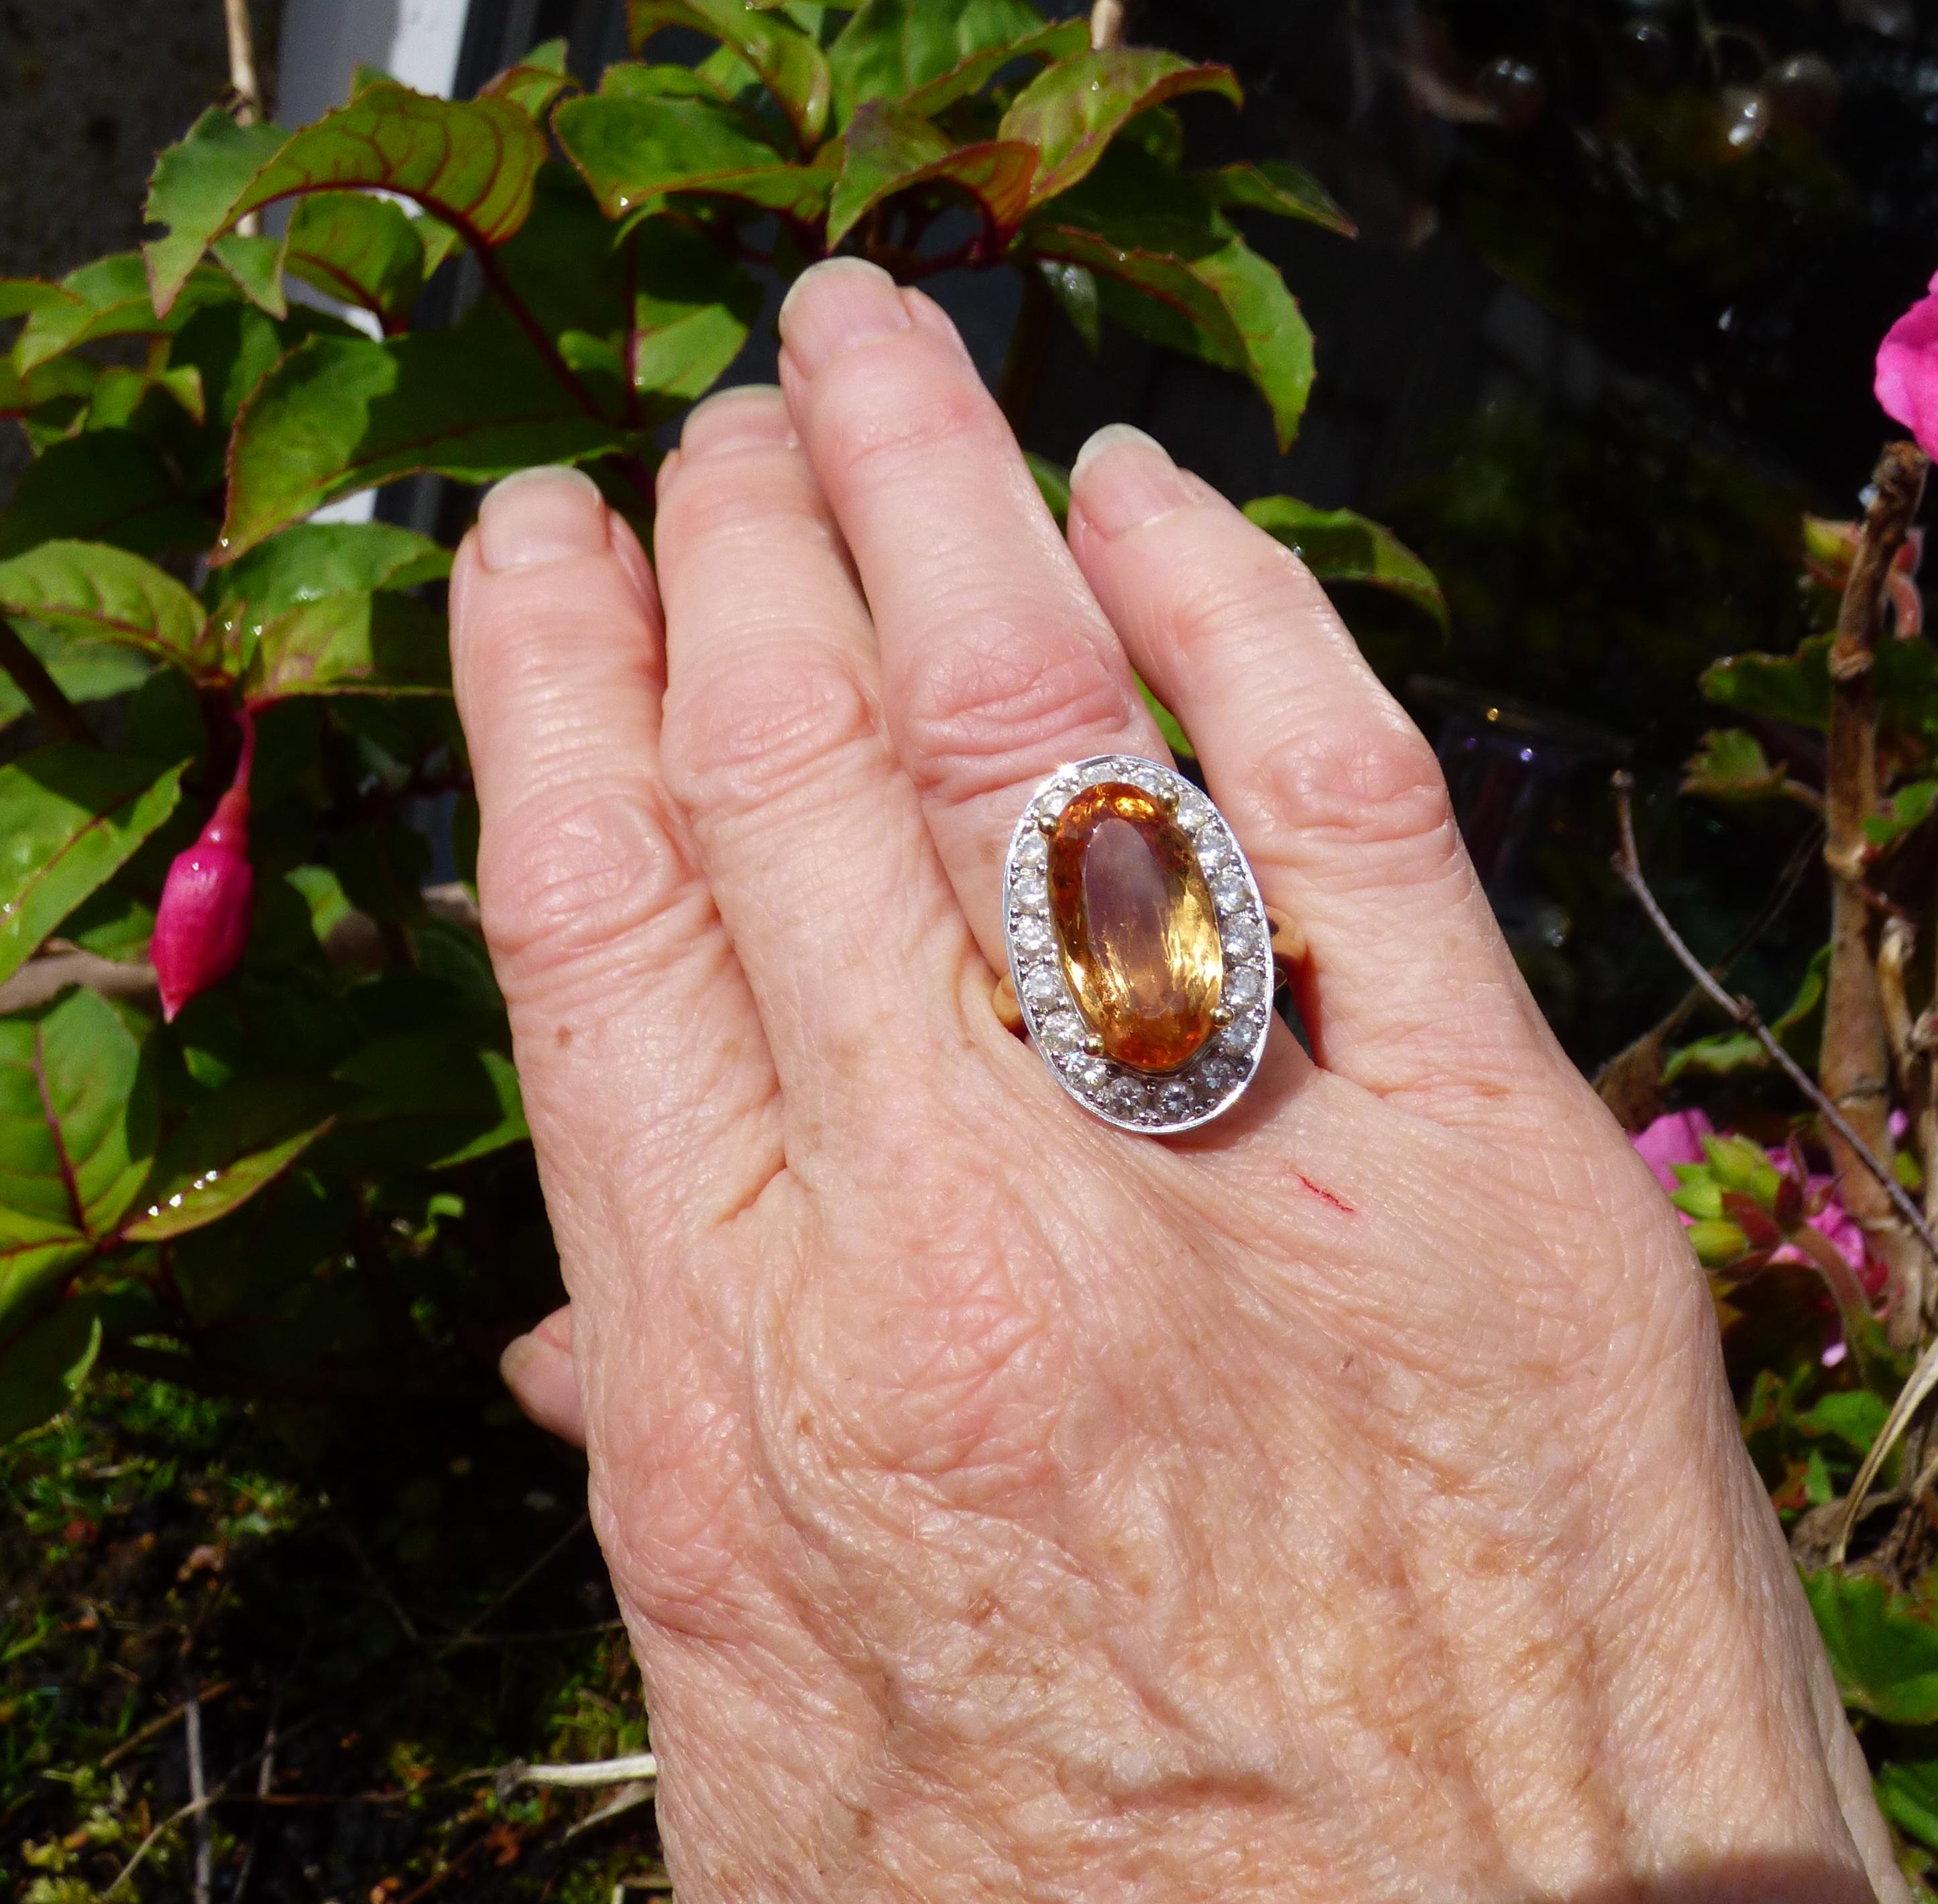 This ring fills the finger like no other! The bright colourful Imperial Topaz is 18X9mm in size weighing 10.3ct.  The claw set Topaz is surrounded by 18 Diamonds with a total Diamond weight of 1.46ct. The ring is handmade in 18K yellow gold with the